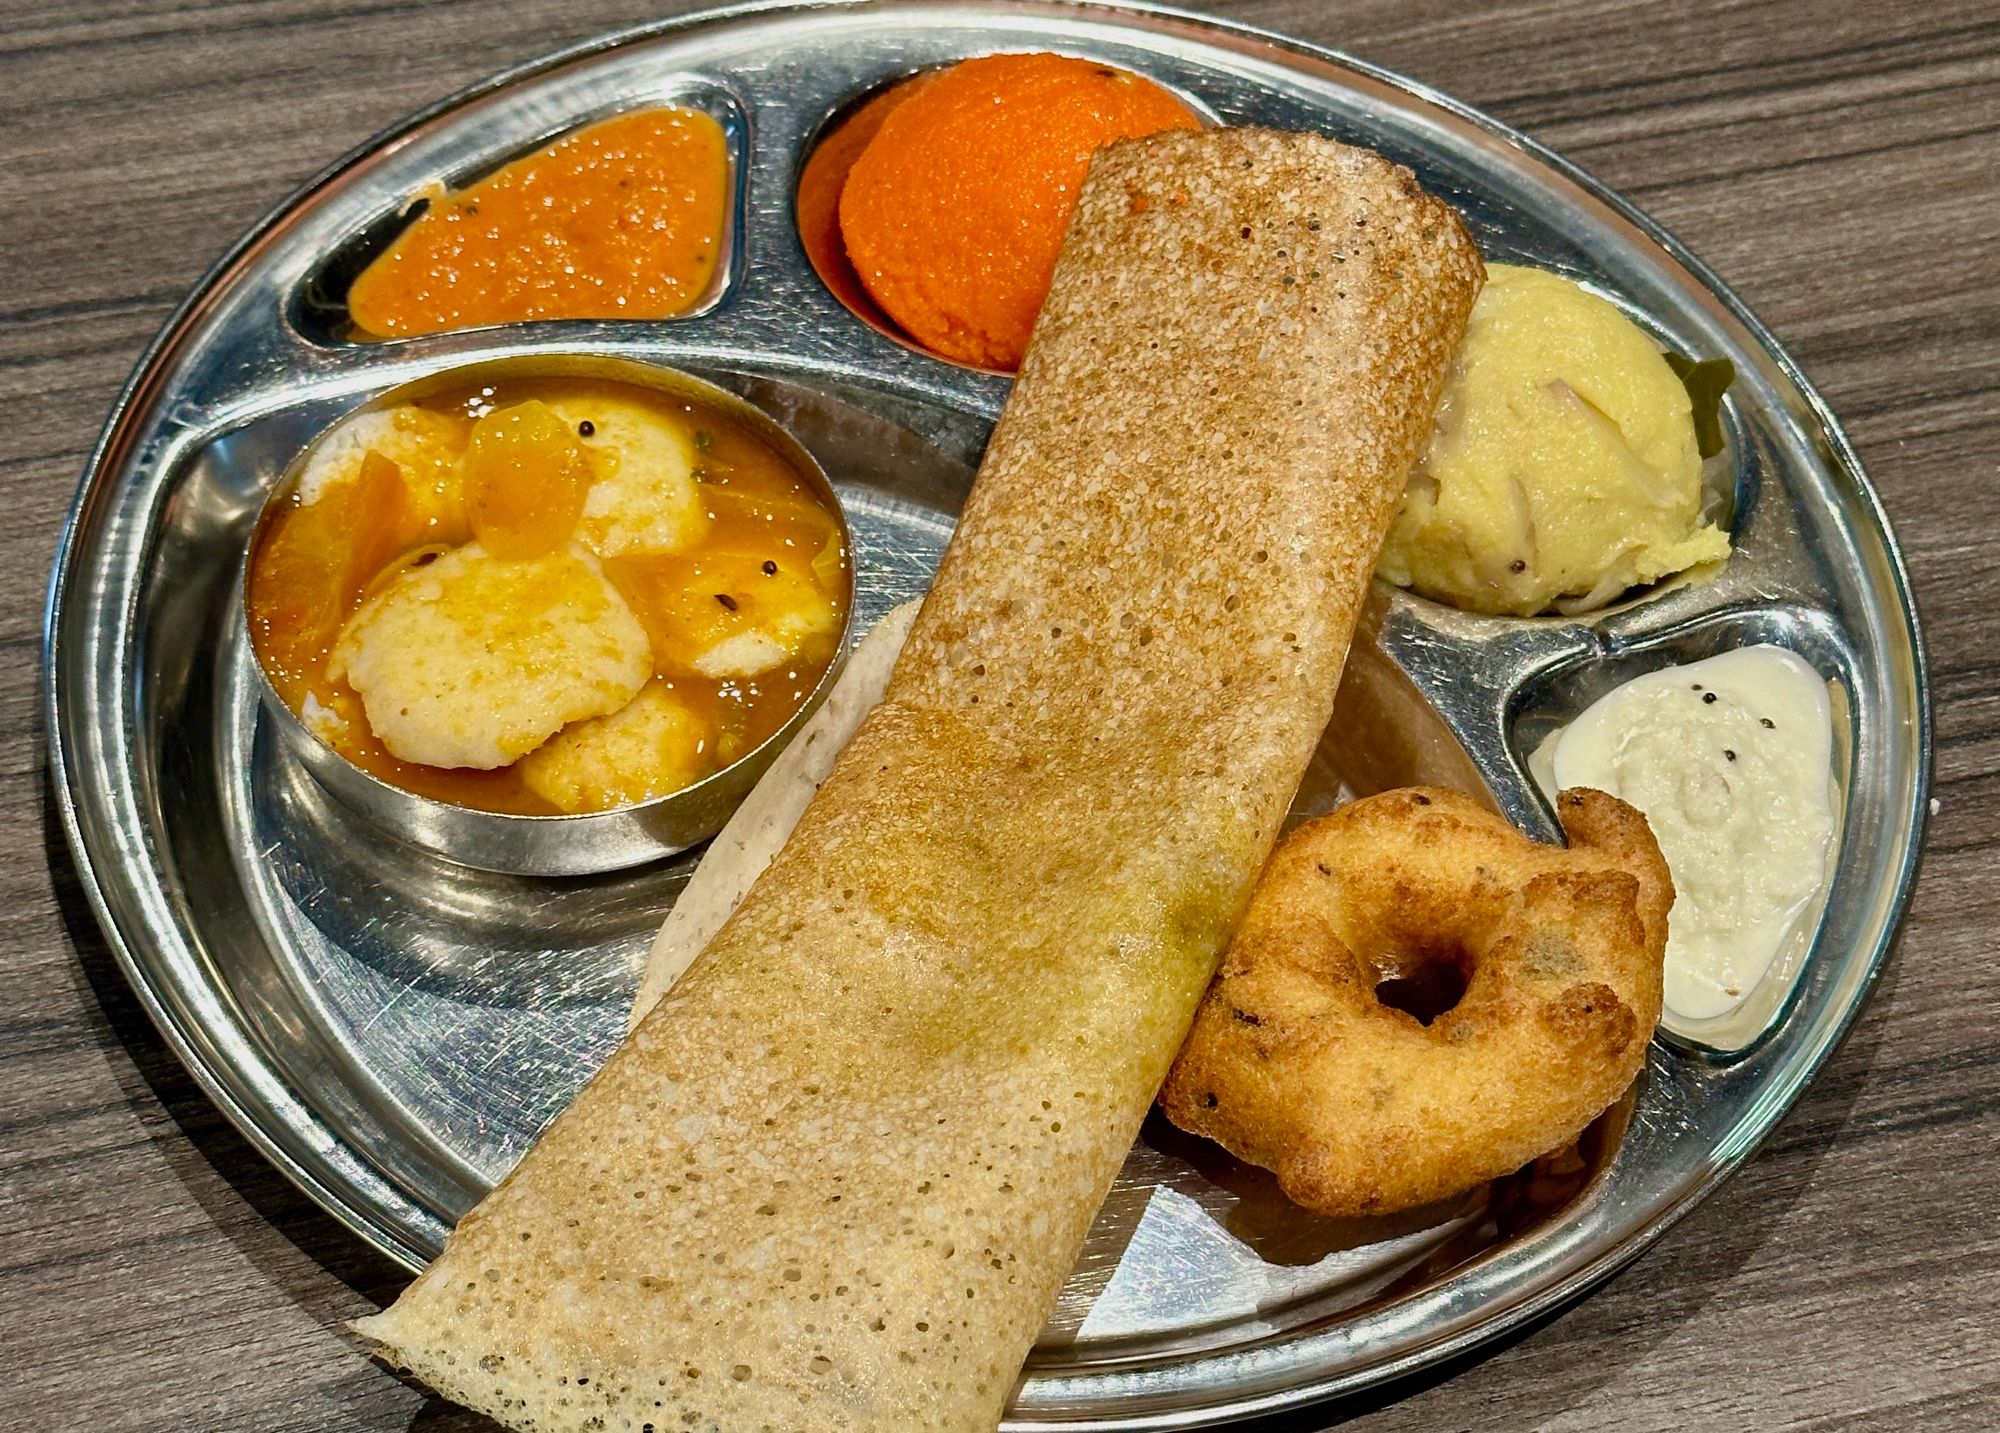 My mini tiffin in Sangeetha Restaurant in Kuala Lumpur. The mini idlis are on the bottom left, and the dosa is the long crepe in the middle.